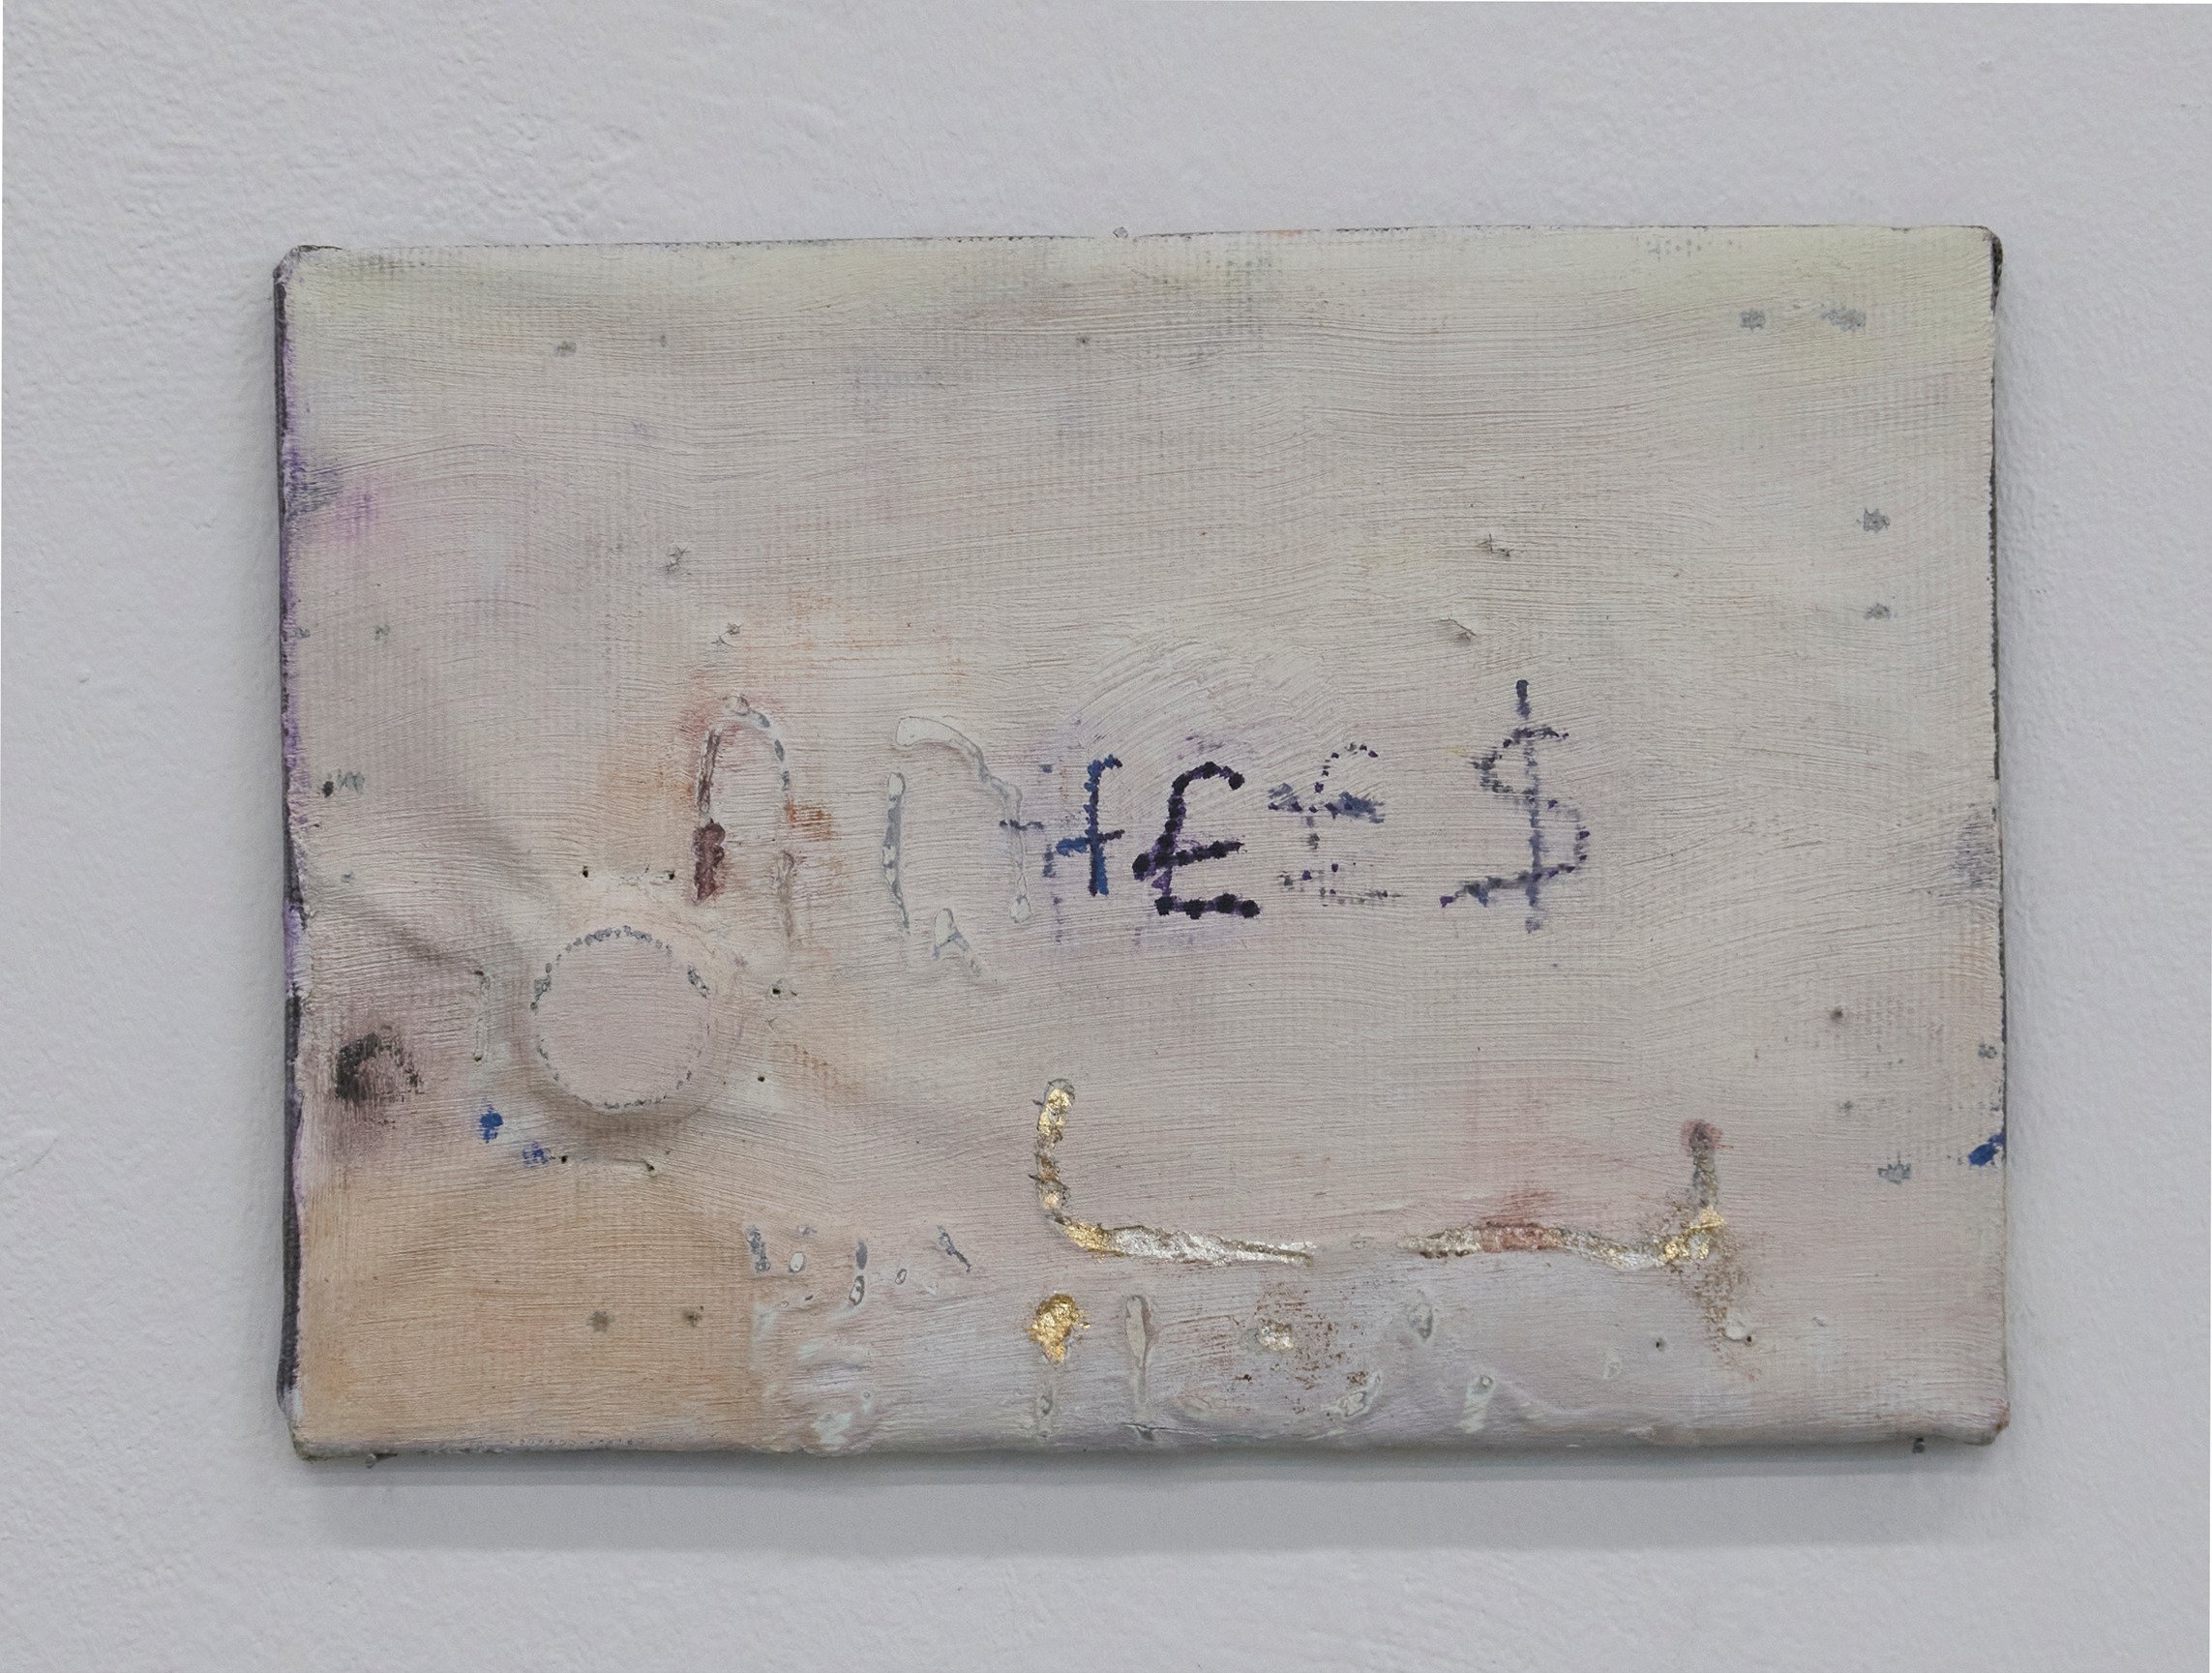   F€£$ Brief Mark , Oil and Plaster on Canvas with inserted coin, 21 x 14.5cm 2023   